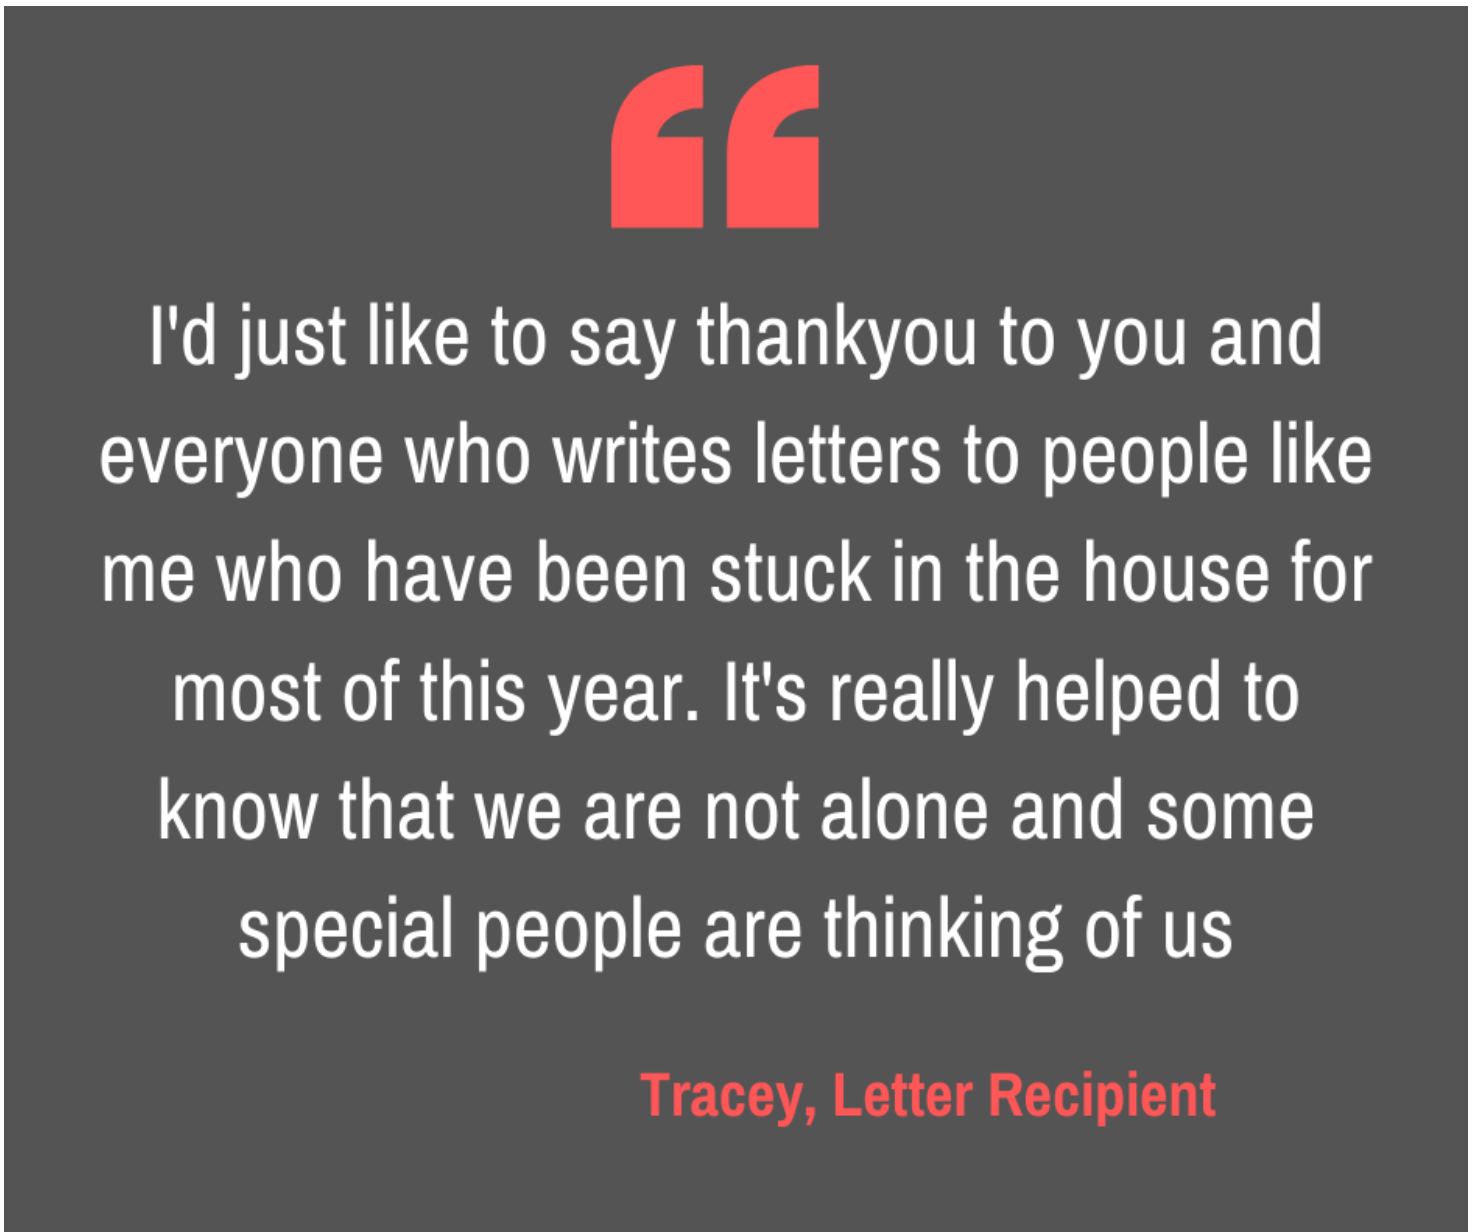 Tracy - Letter Recipient - Quote Image.png